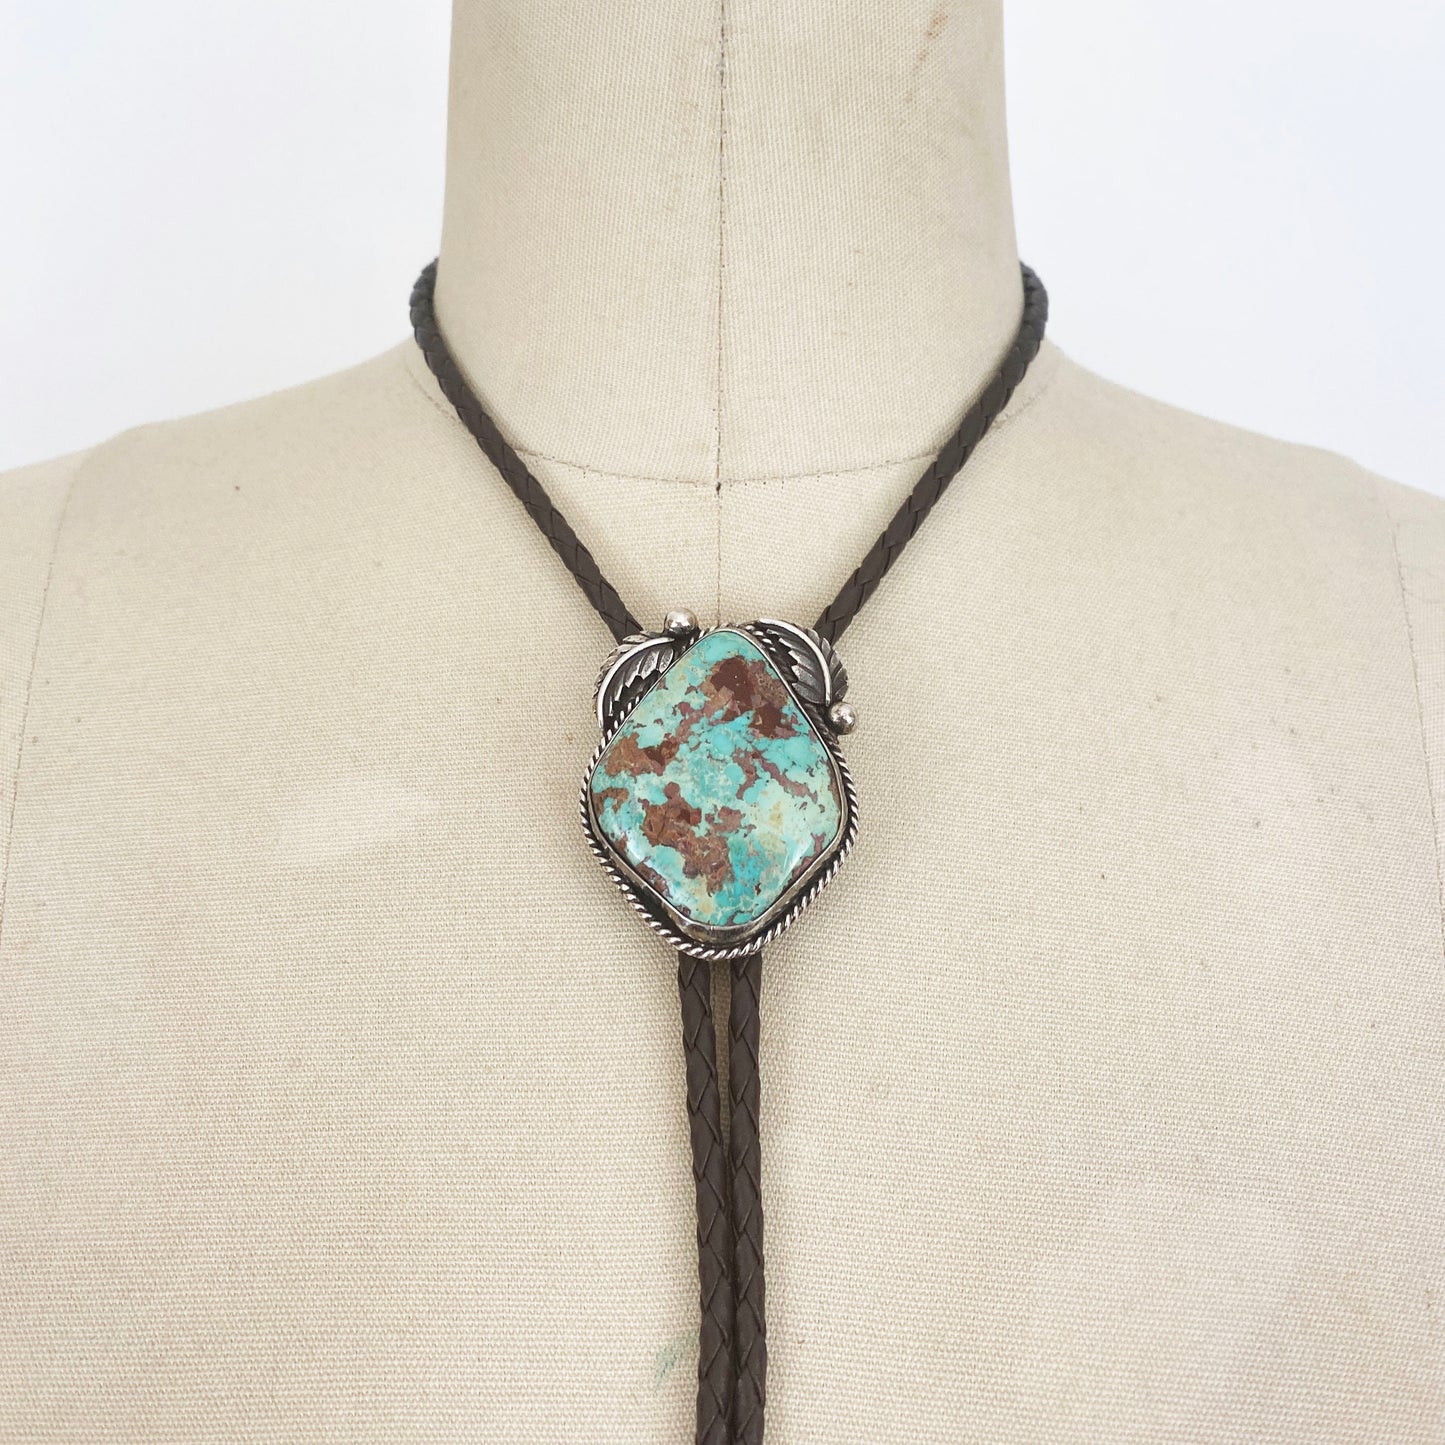 Vintage Native American Apache Jewelry Large Sterling Silver and Turquoise Bolo Tie Southwest Signed Artist Darrell Victor